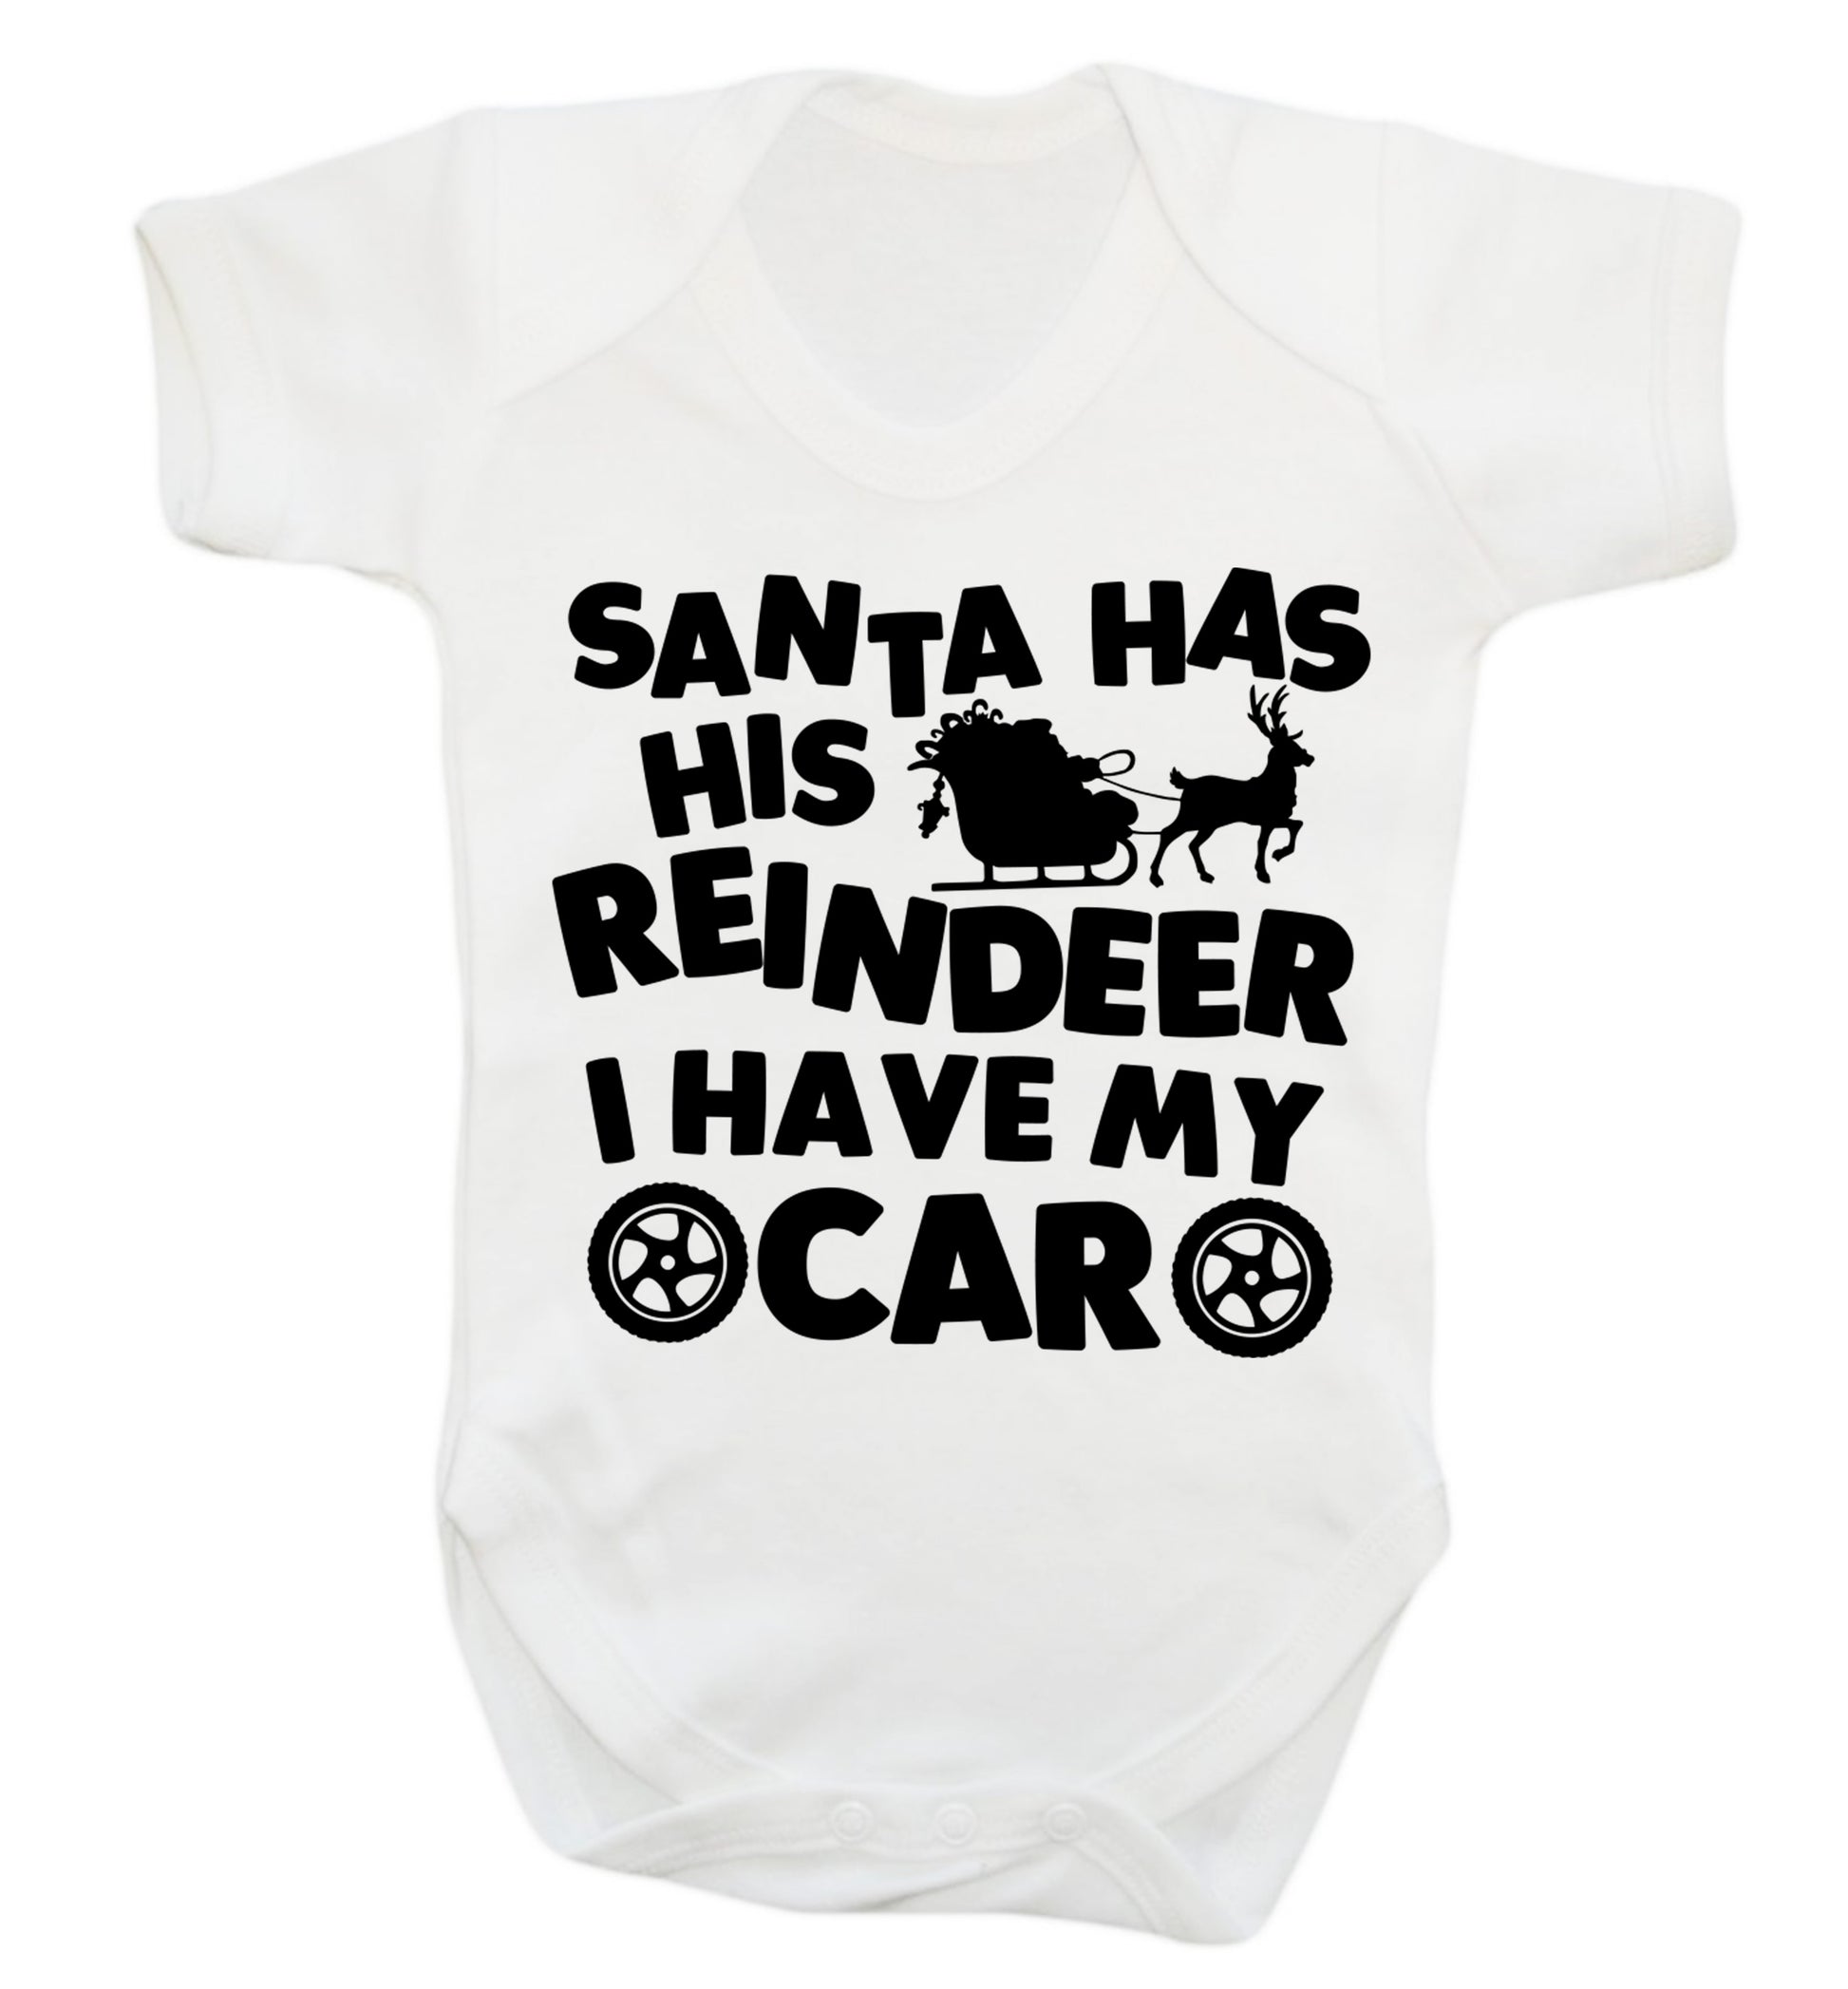 Santa has his reindeer I have my car Baby Vest white 18-24 months